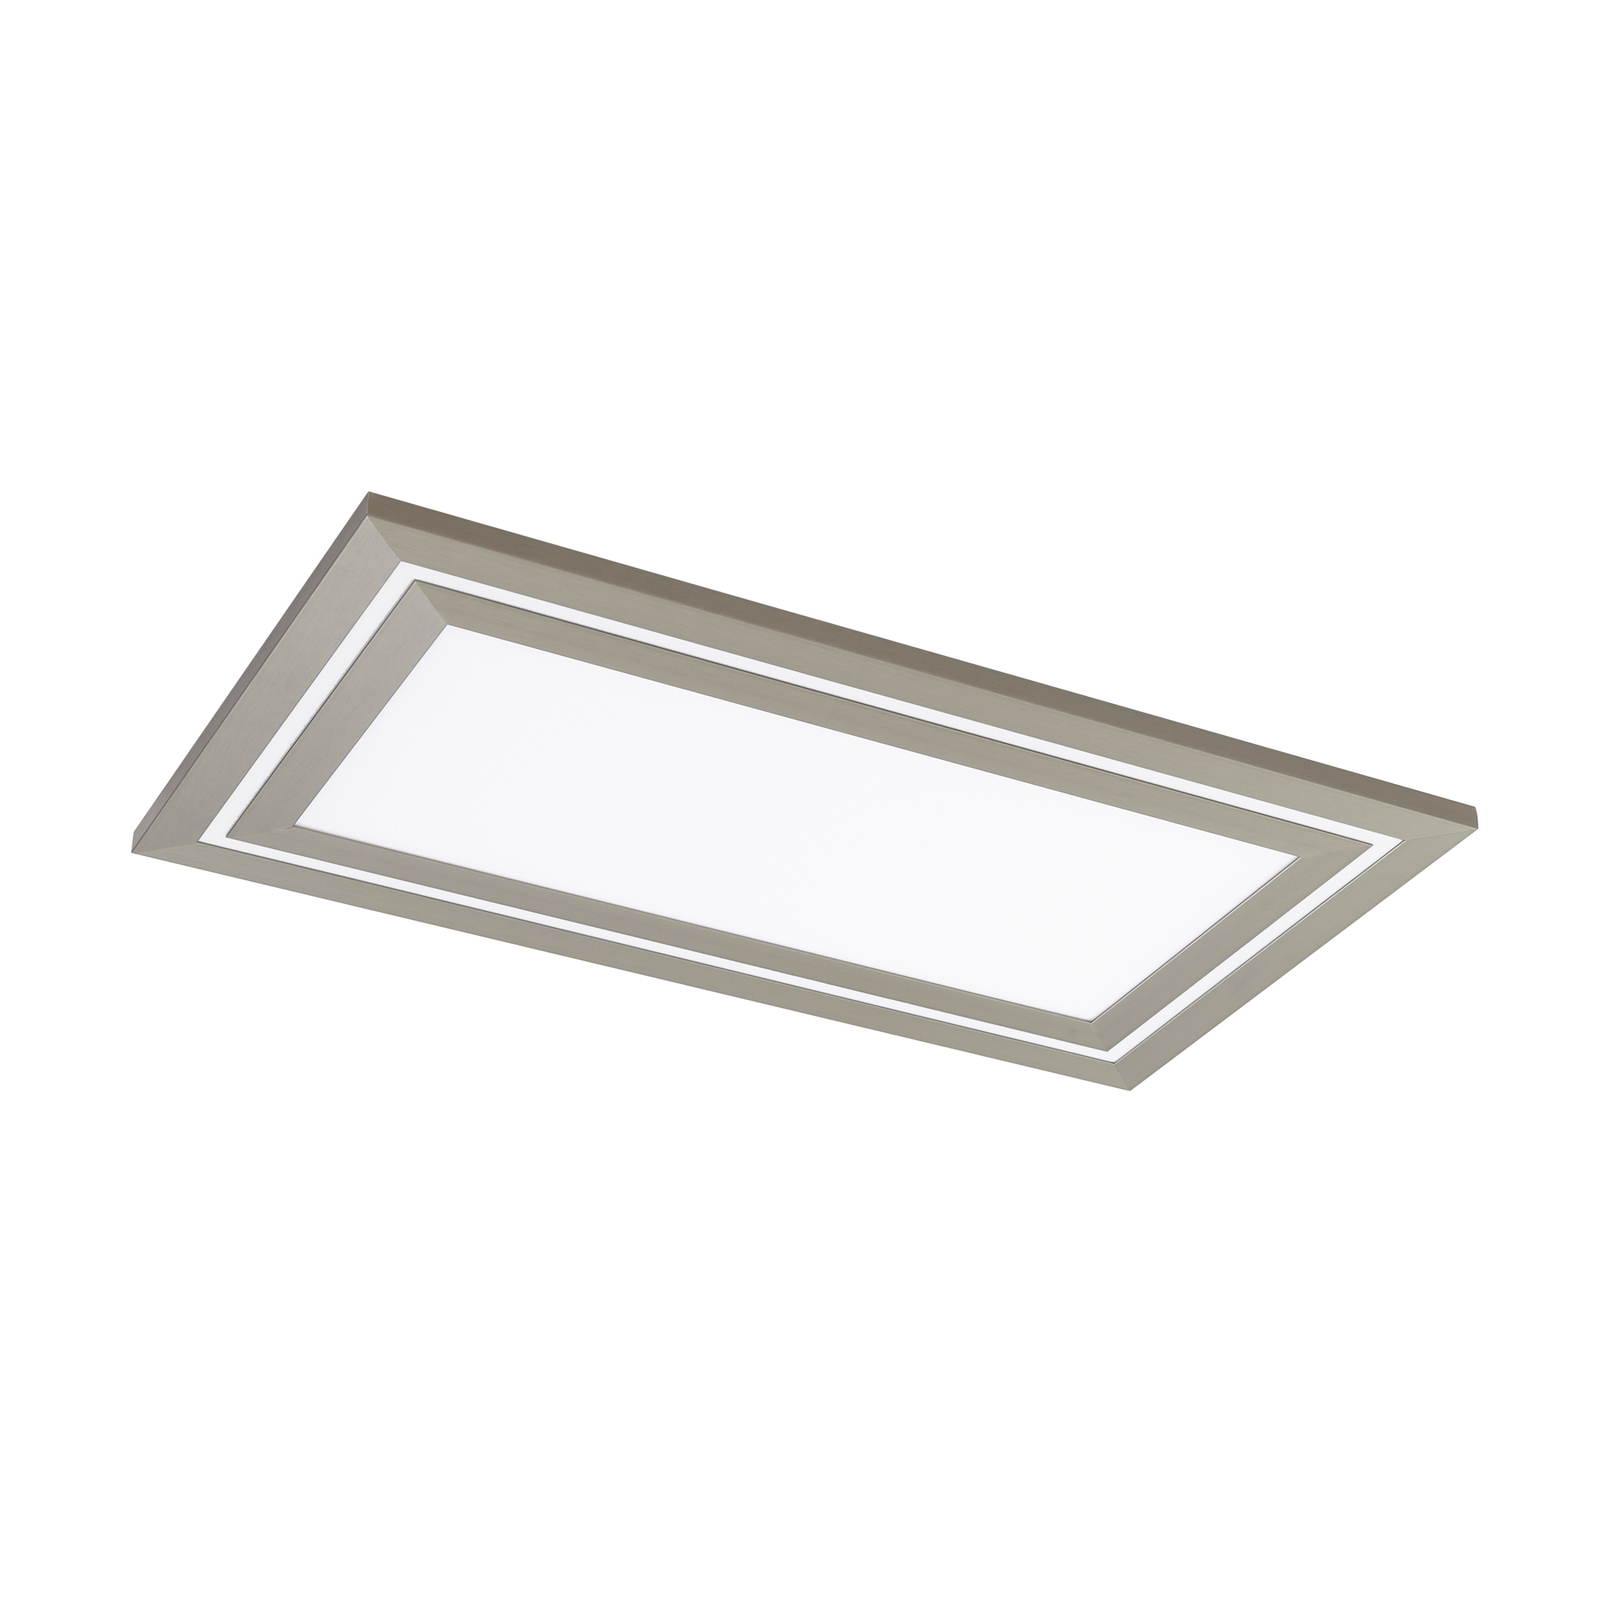 Lucande LED-Deckenlampe Leicy, nickel, 80 cm, RGBIC, CCT